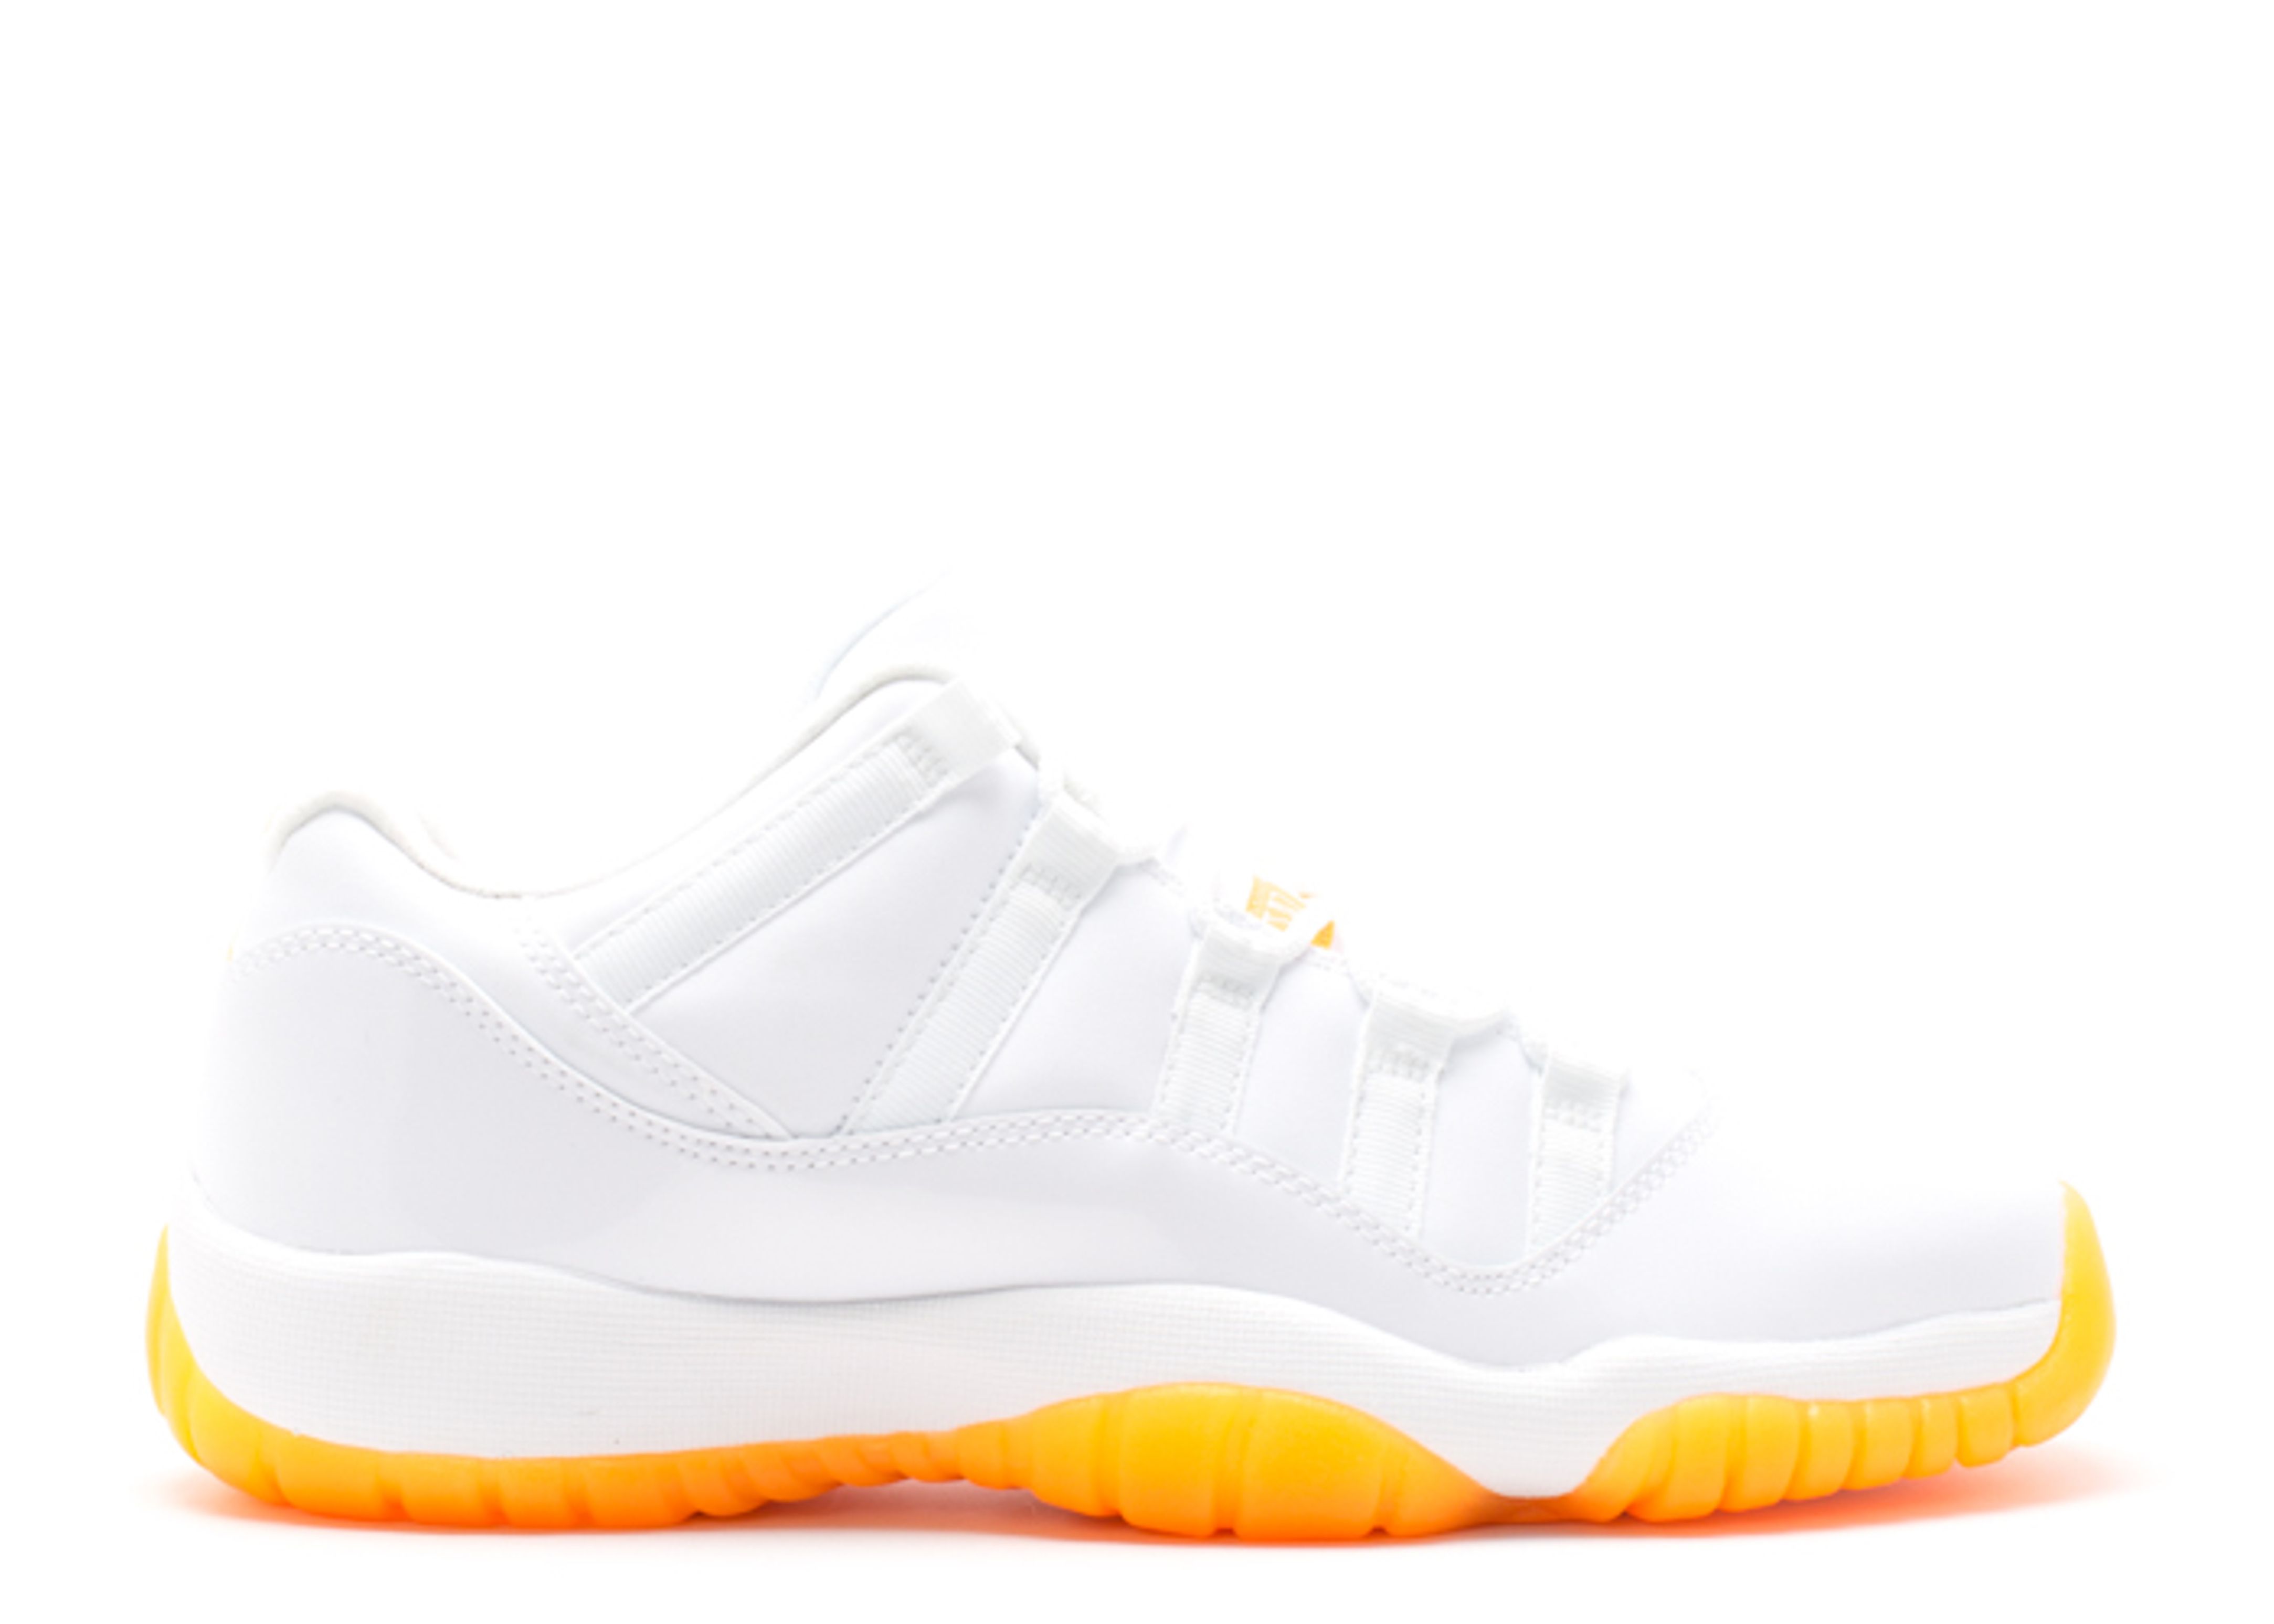 jordan 11s citrus - Online Discount Shop for Electronics, Apparel, Toys,  Books, Games, Computers, Shoes, Jewelry, Watches, Baby Products, Sports \u0026  Outdoors, Office Products, Bed \u0026 Bath, Furniture, Tools, Hardware,  Automotive Parts,